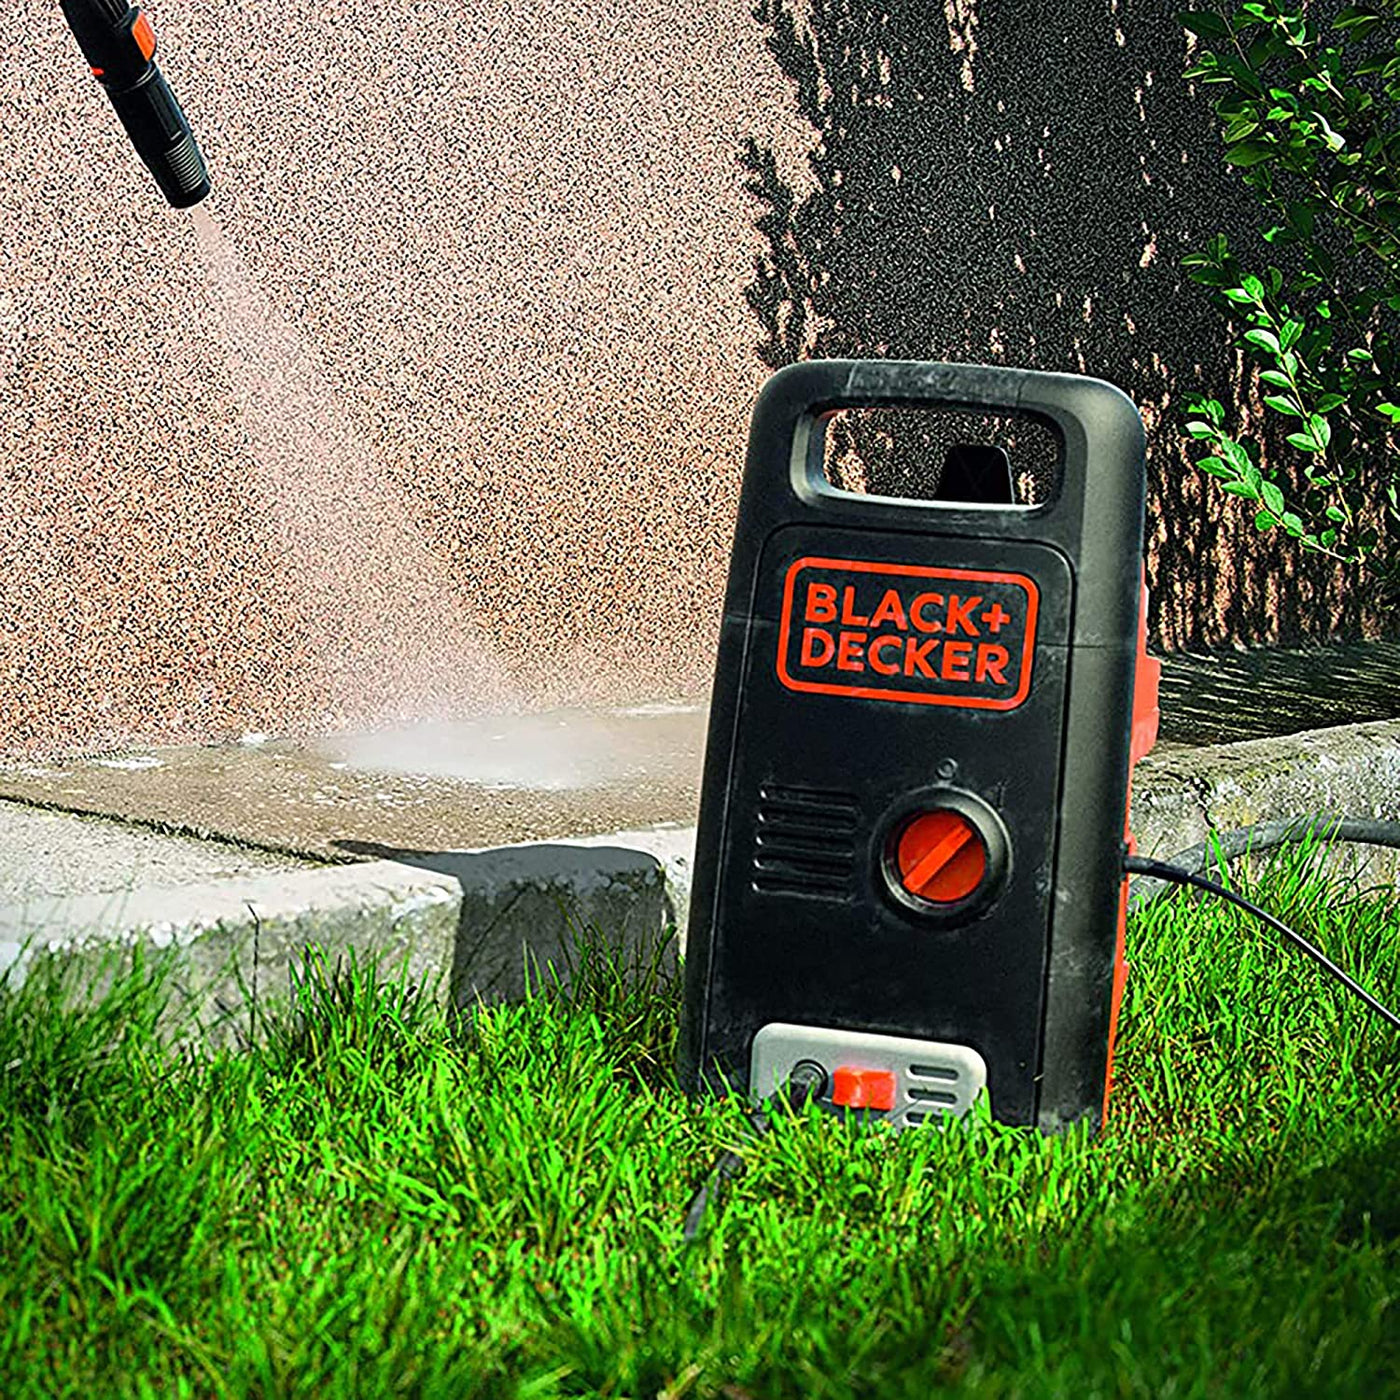 Brown Box 1300W 100 Bar Pressure Washer for Home, Garden and Cars, Black/Orange